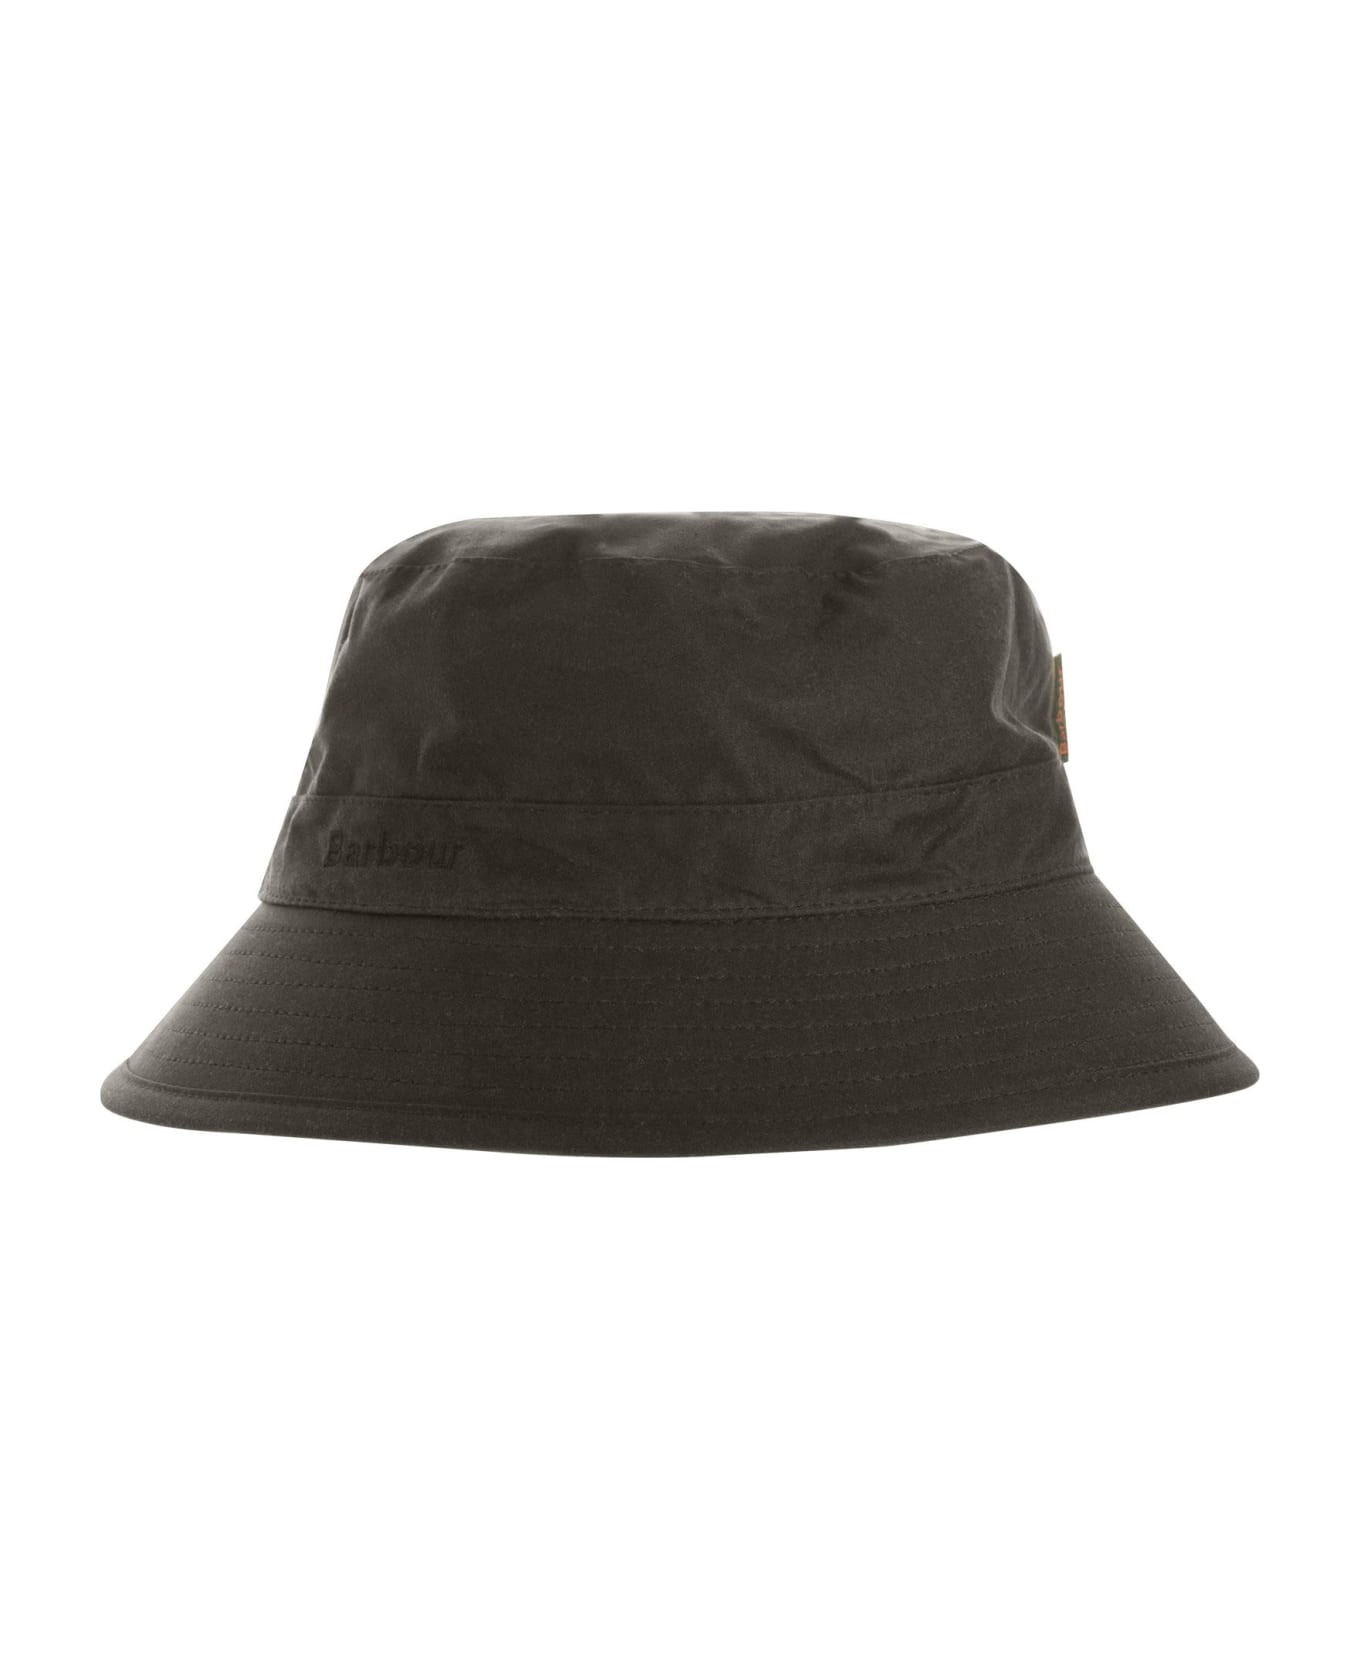 Barbour Sporthut Wax - Hat - Olive Green